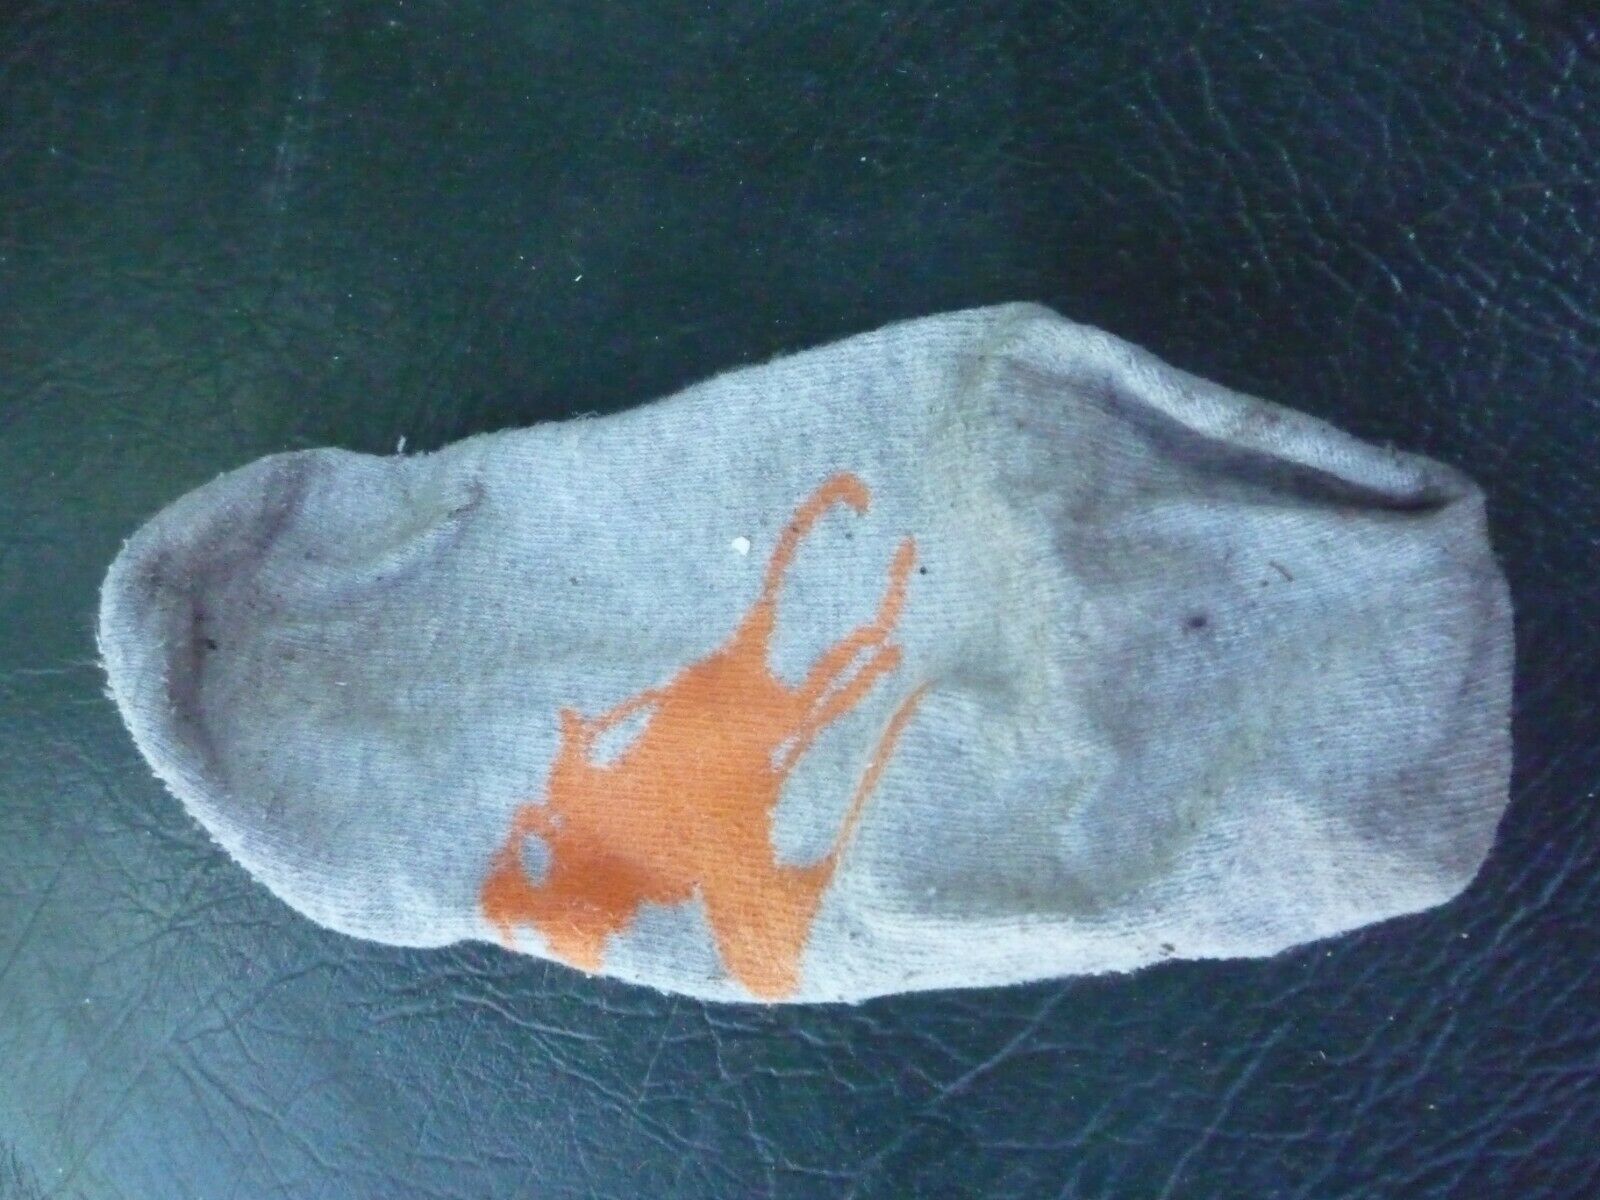 Niterain Band Personal Owned Dirty Worn Sock/ Norway Musicians